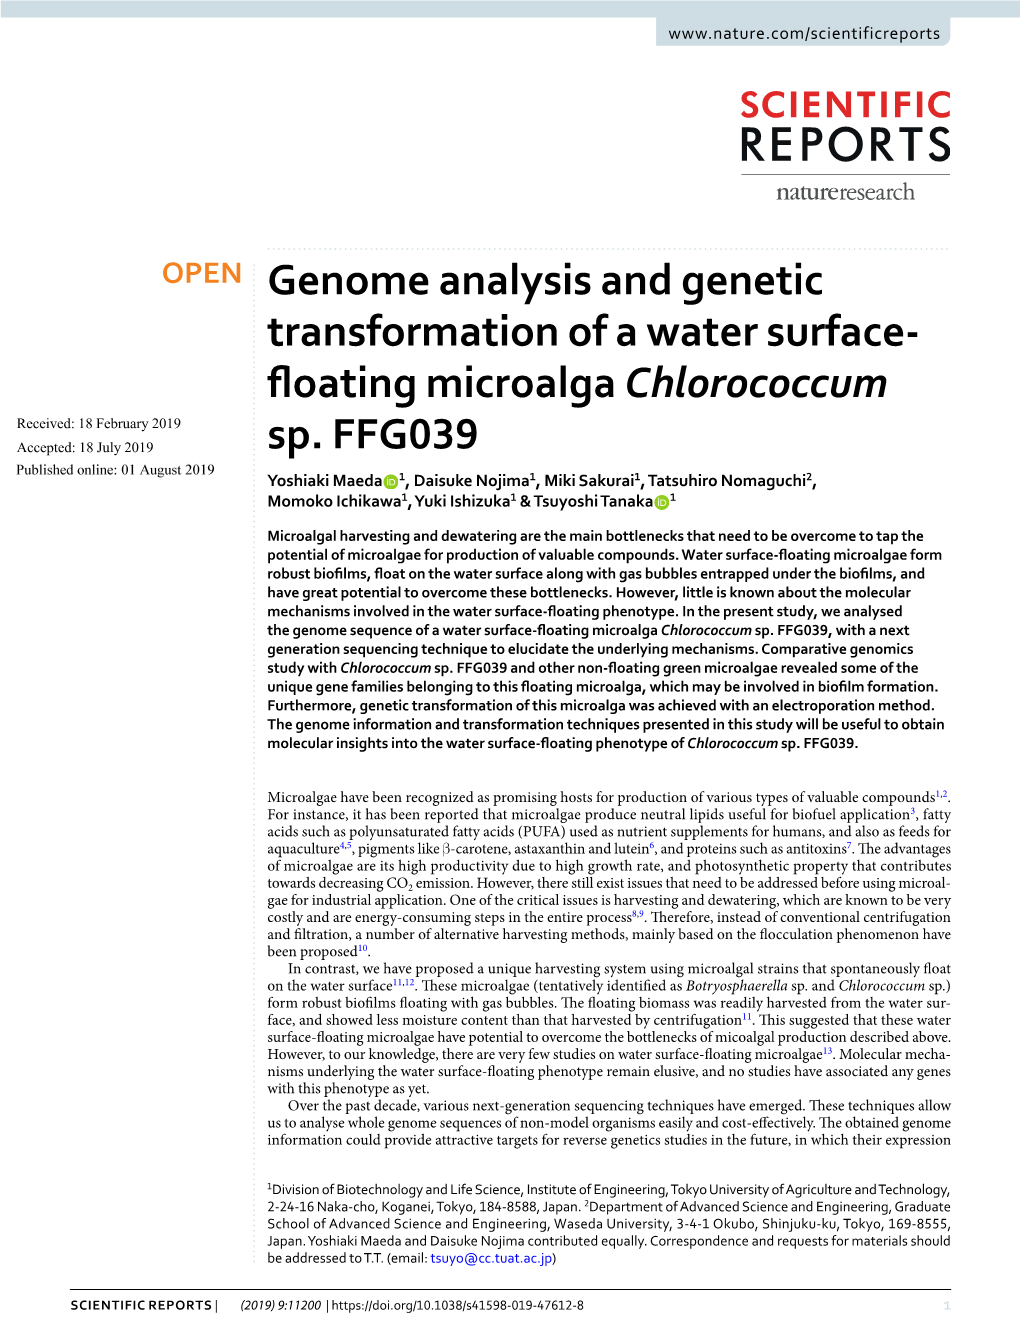 Genome Analysis and Genetic Transformation of a Water Surface-Floating Microalga Chlorococcum Sp. FFG039